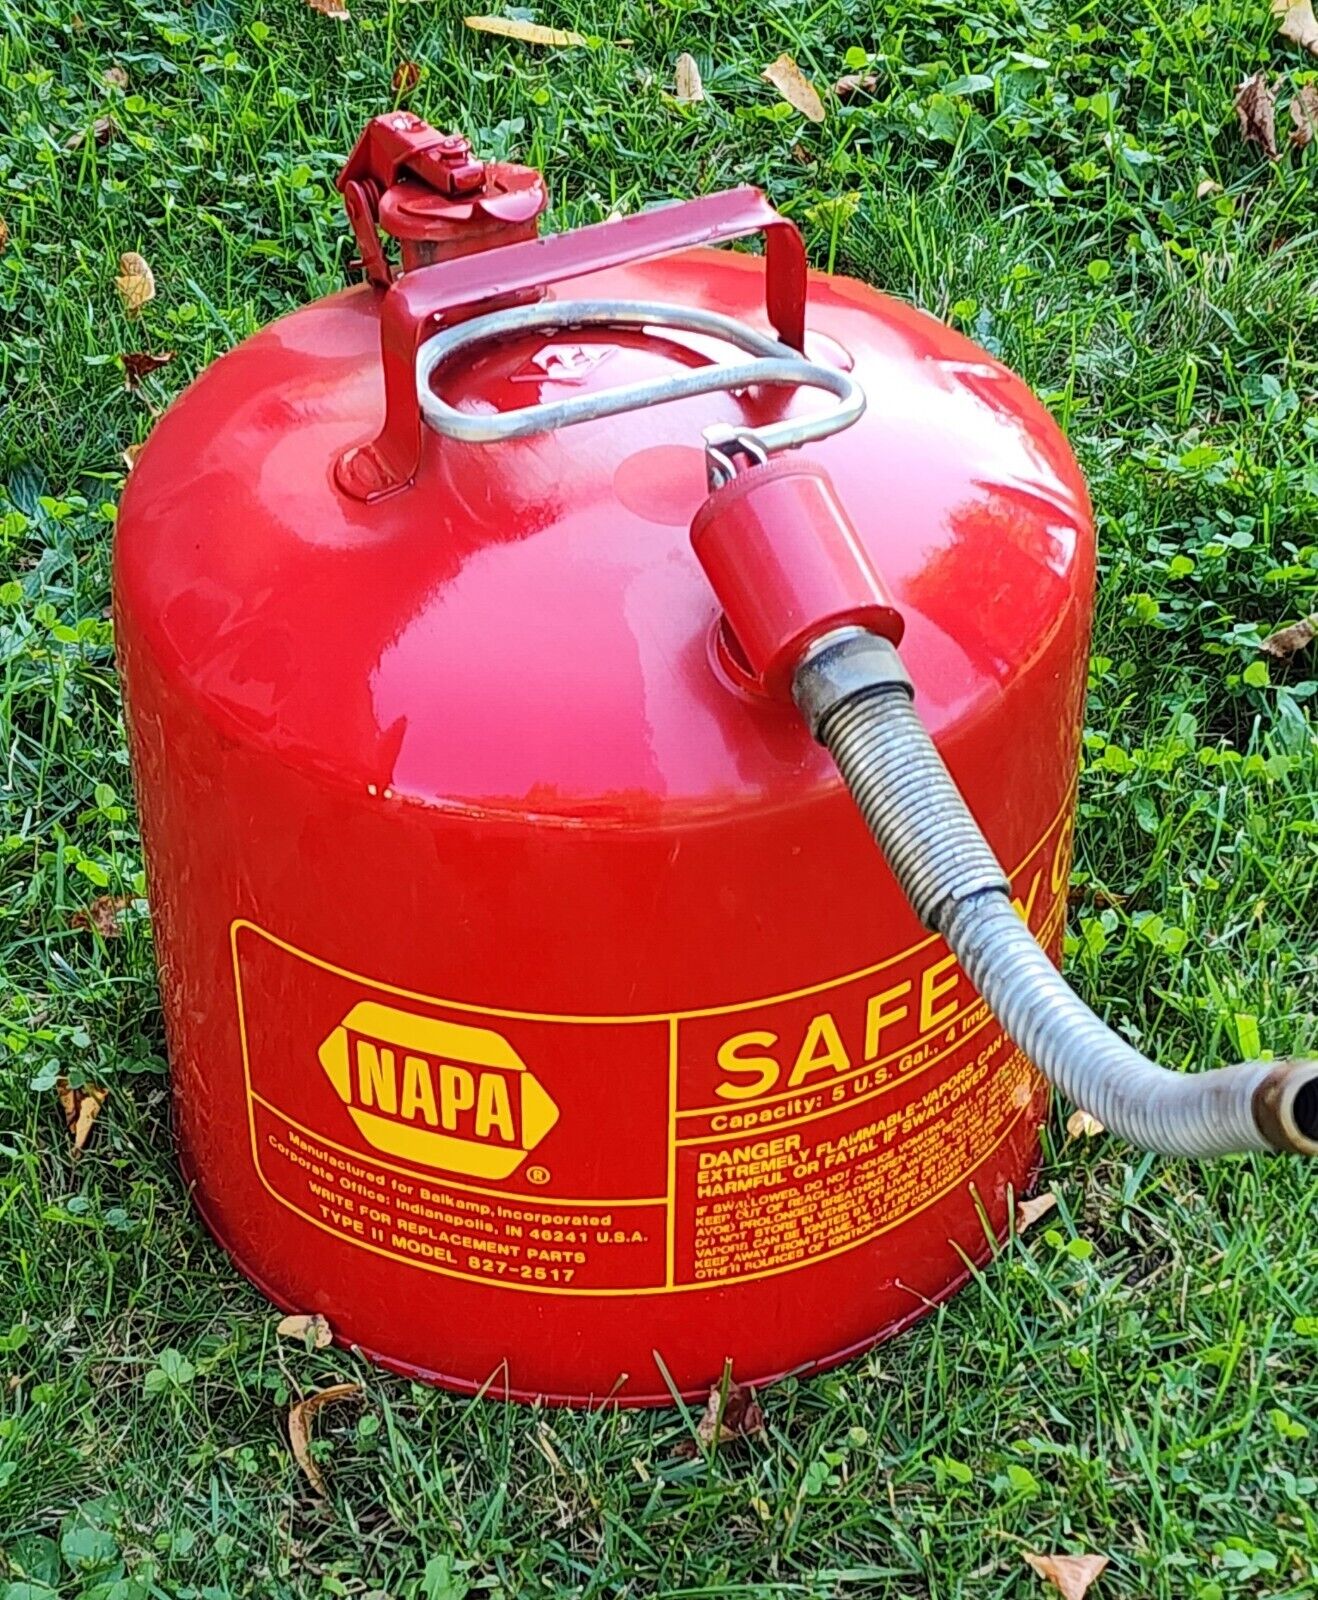 NAPA/EAGLE 5 GALLON METAL SAFETY GAS CAN Steel Release Handle NICE RARE 